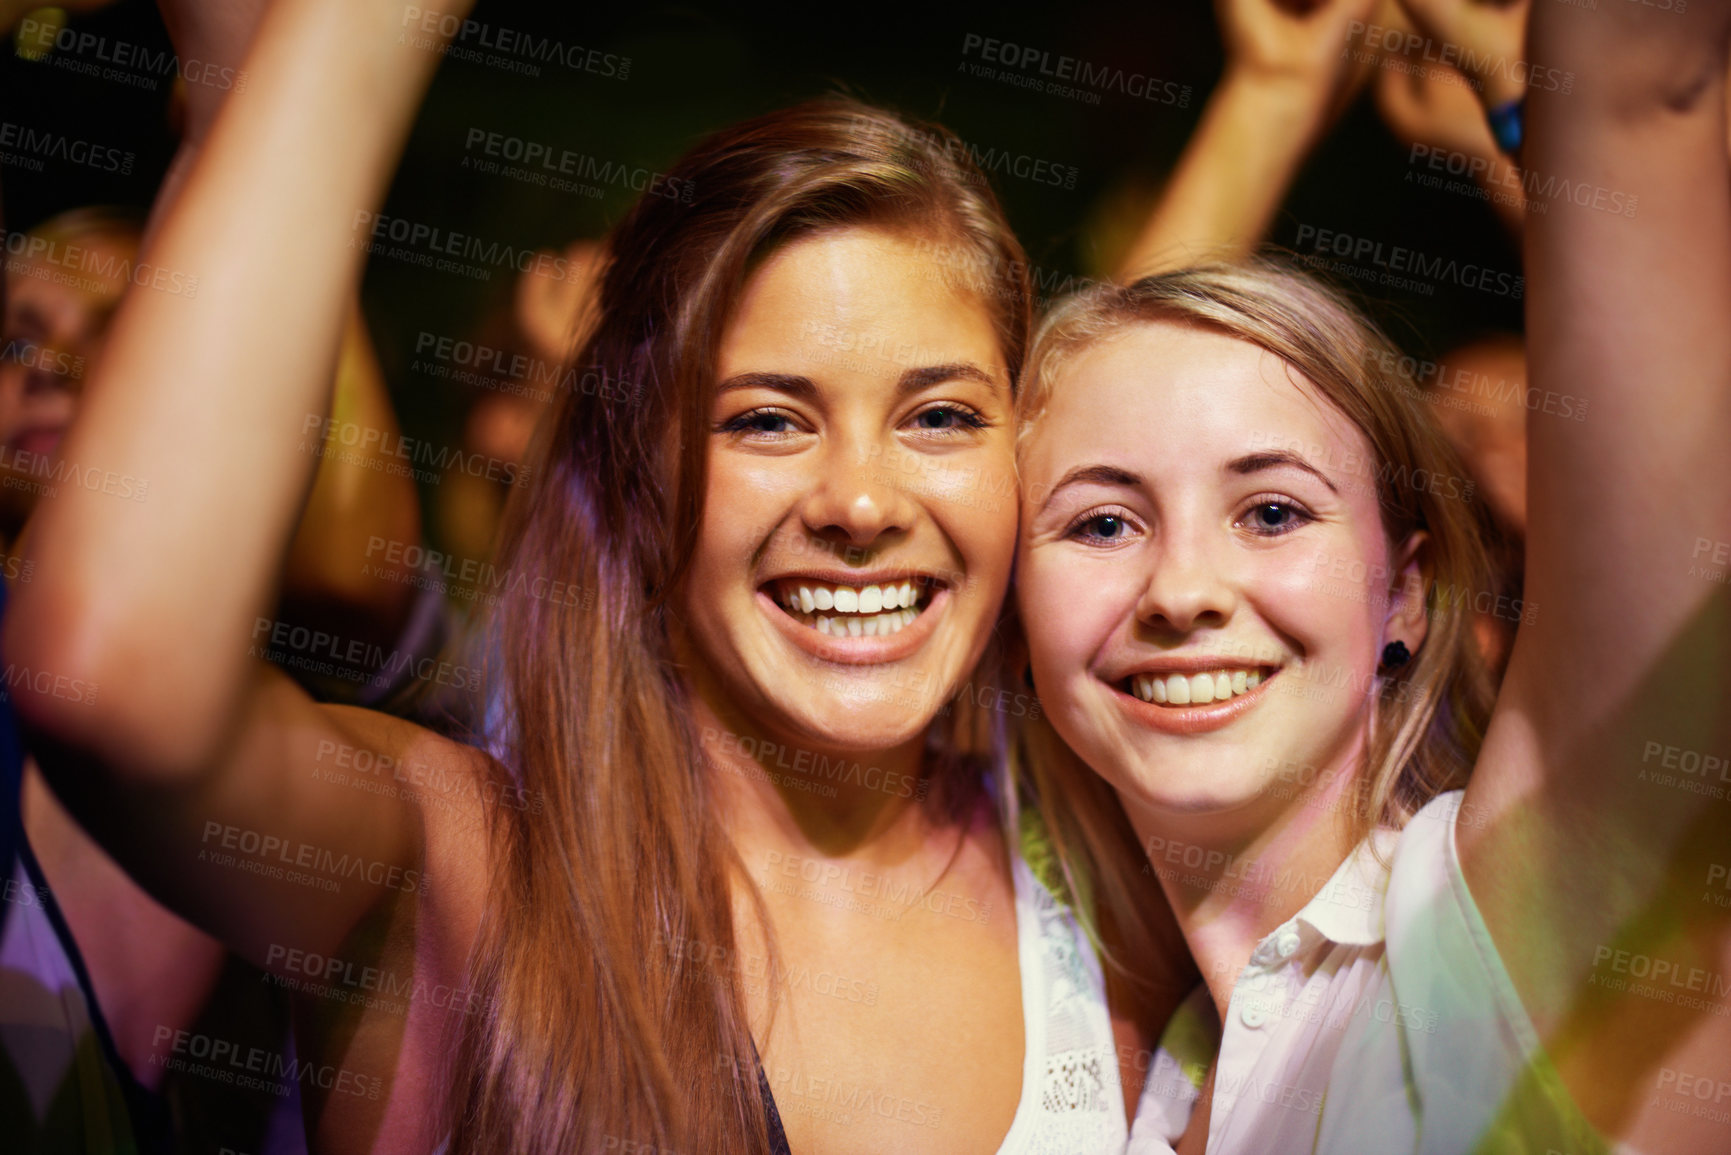 Buy stock photo Young girls in an audience enjoying their favourite band's performance